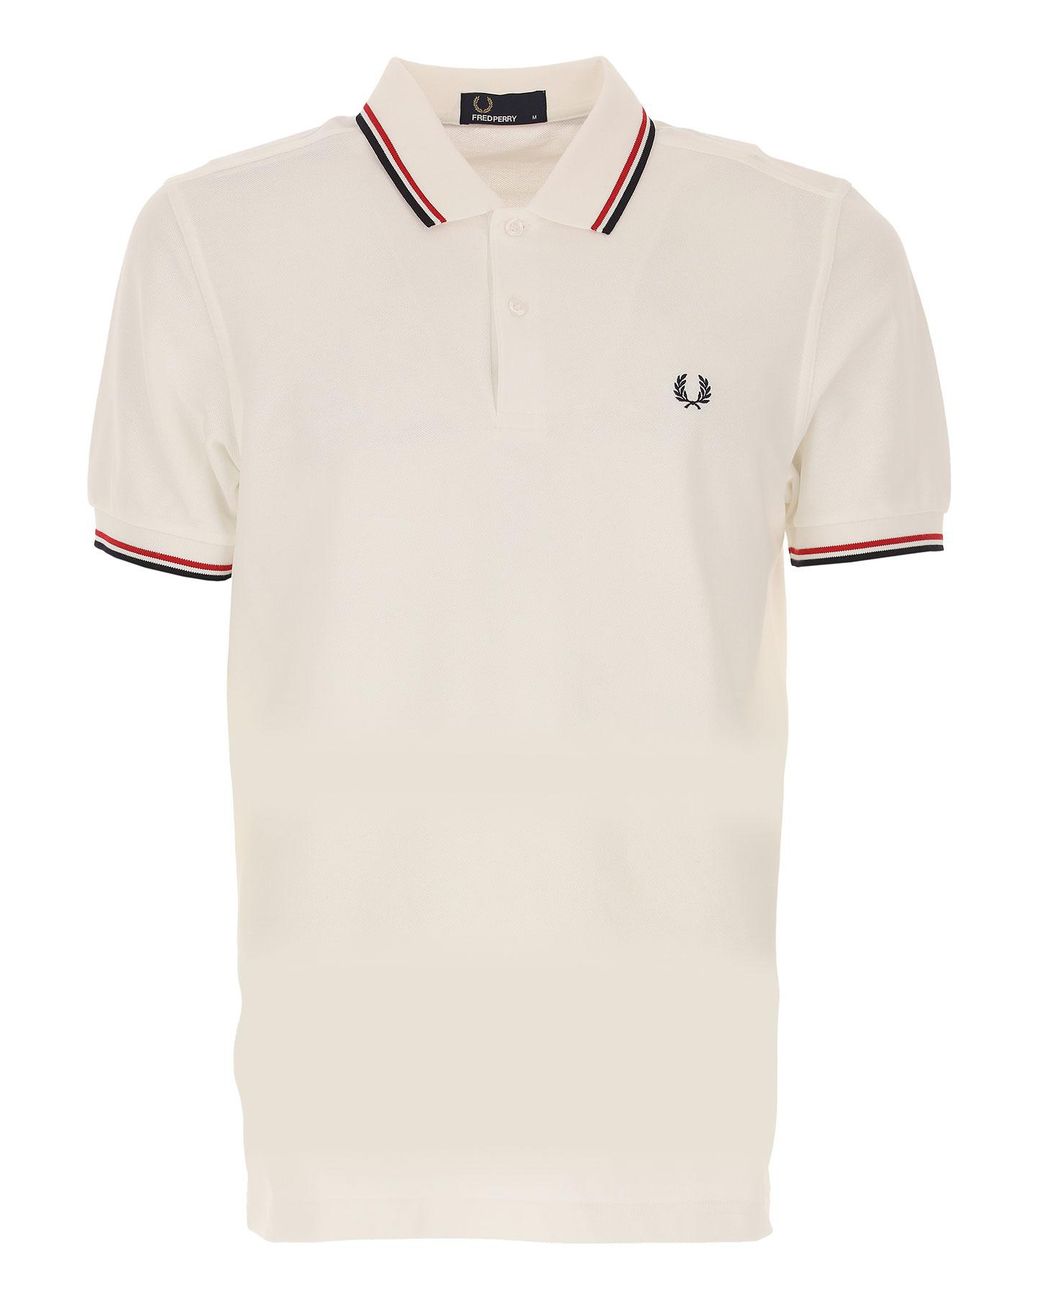 Fred Perry Polo Shirt For Men in White for Men - Save 4% - Lyst